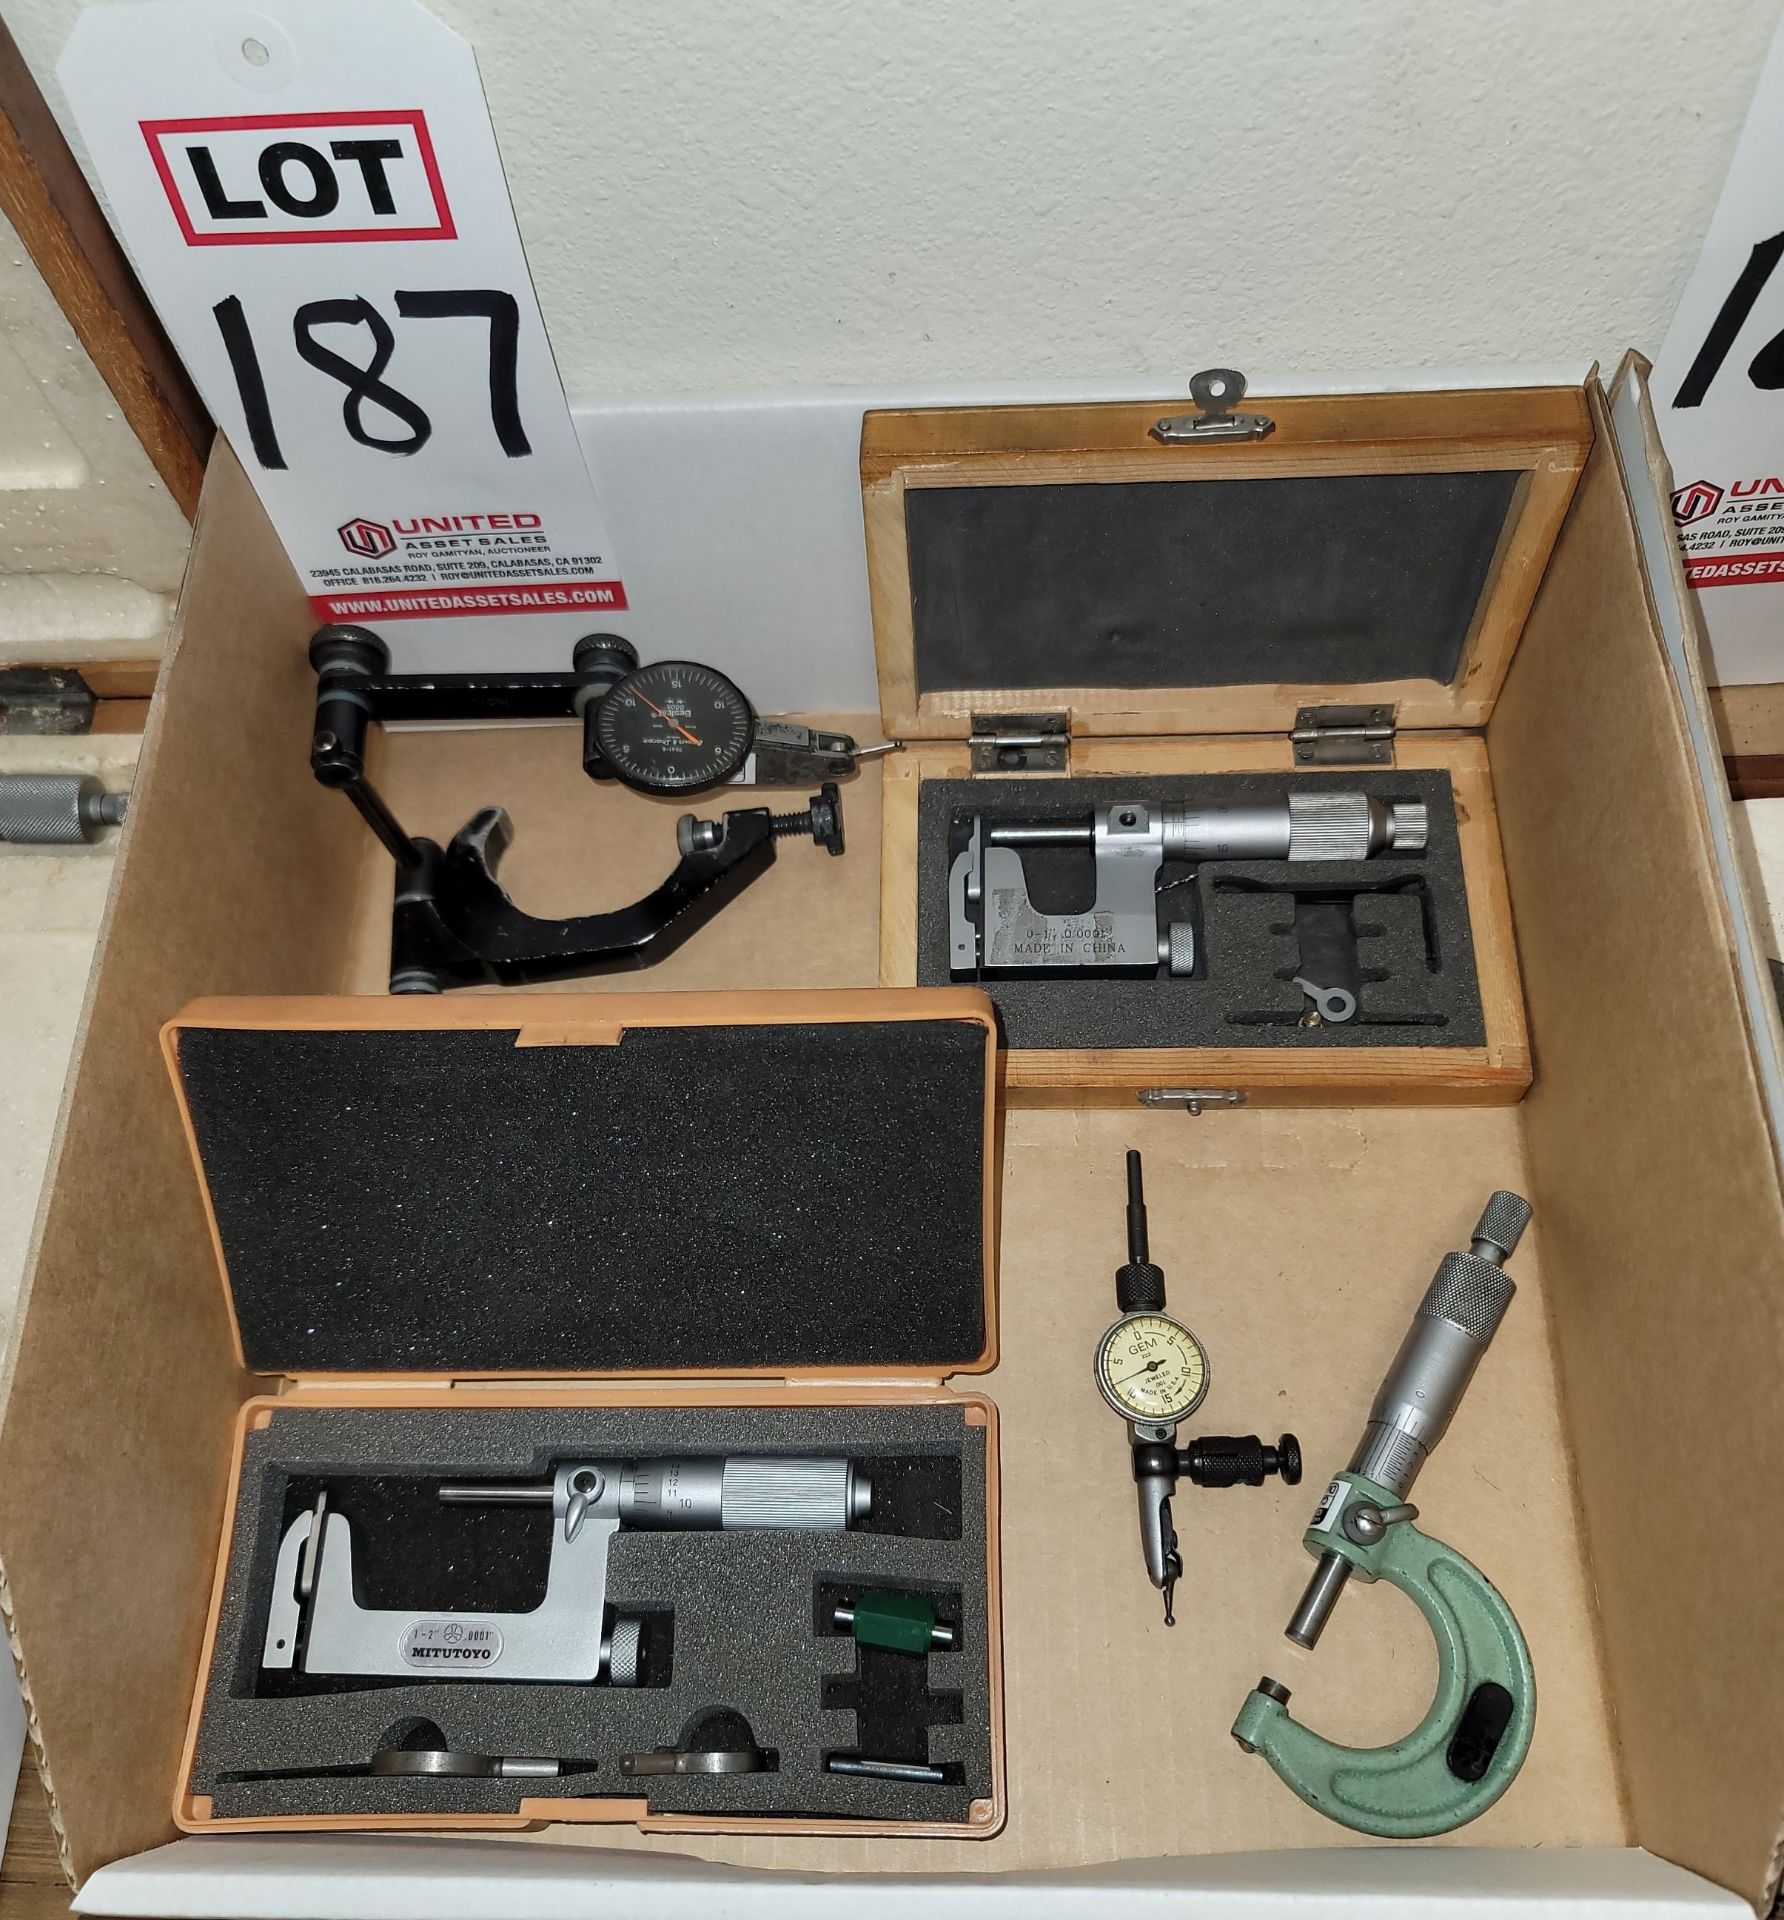 LOT - (2) UNI-MIKE MICROMETERS AND OTHER ITEMS AS PICTURED